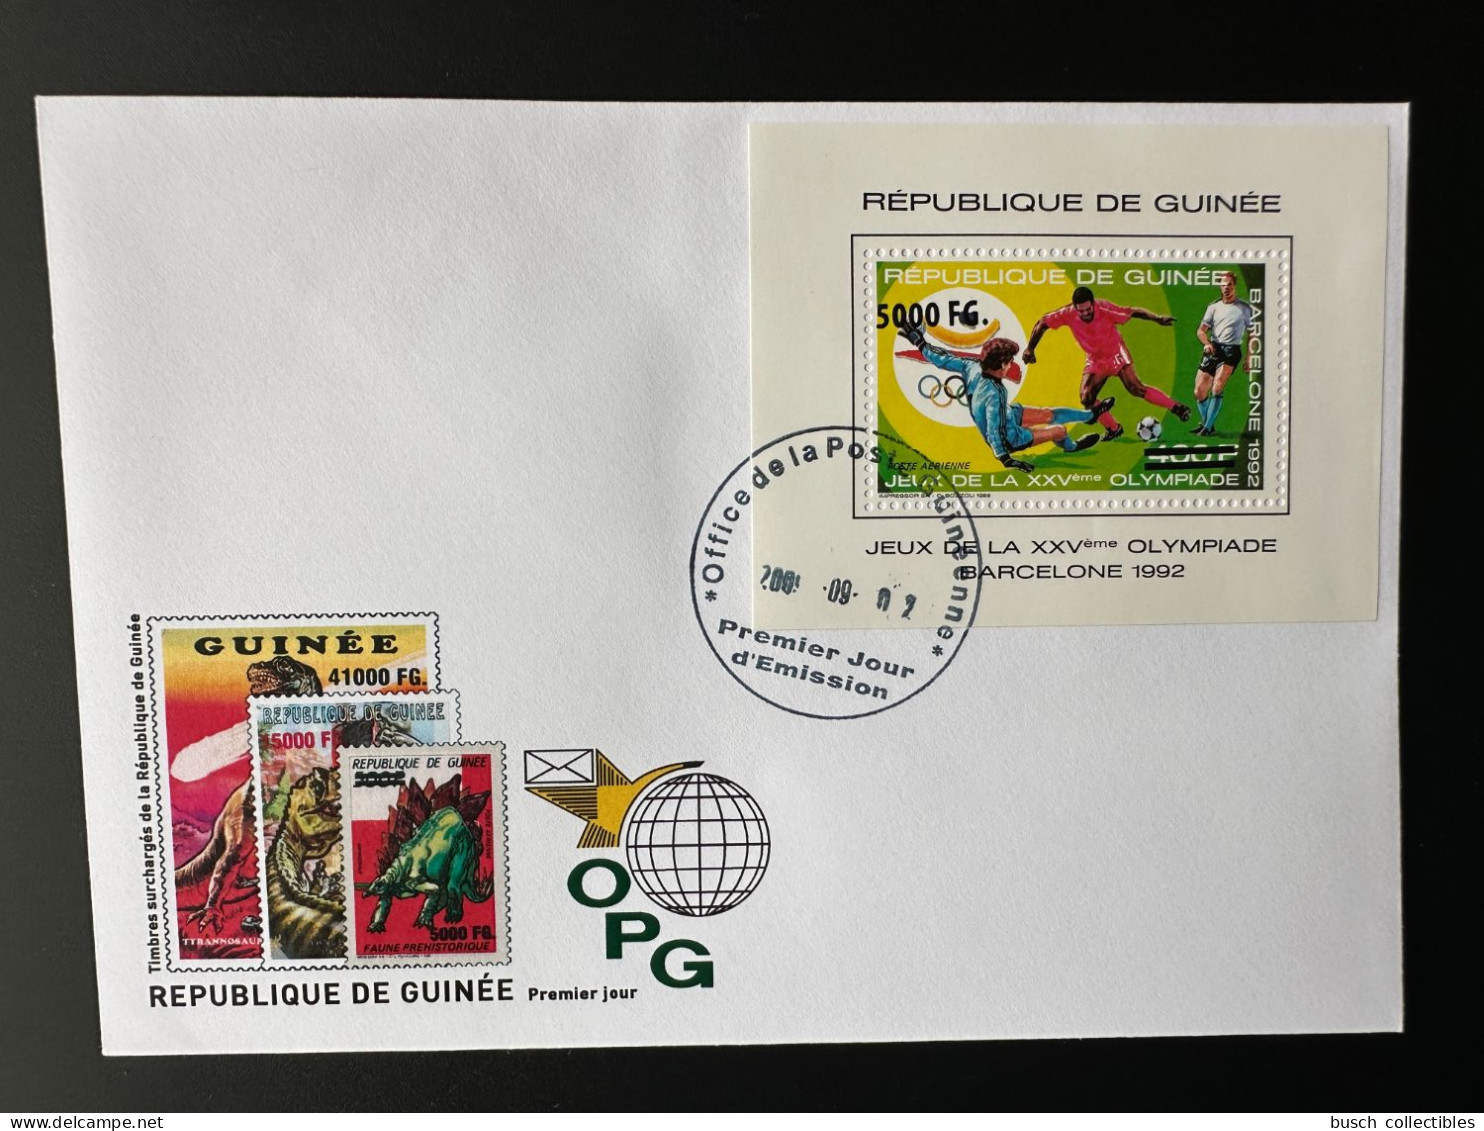 Guinée Guinea 2009 FDC Mi. Bl. 1715 Surchargé Overprint Olympic Games Barcelona 1992 Jeux Olympiques Football Fußball - Sommer 1992: Barcelone